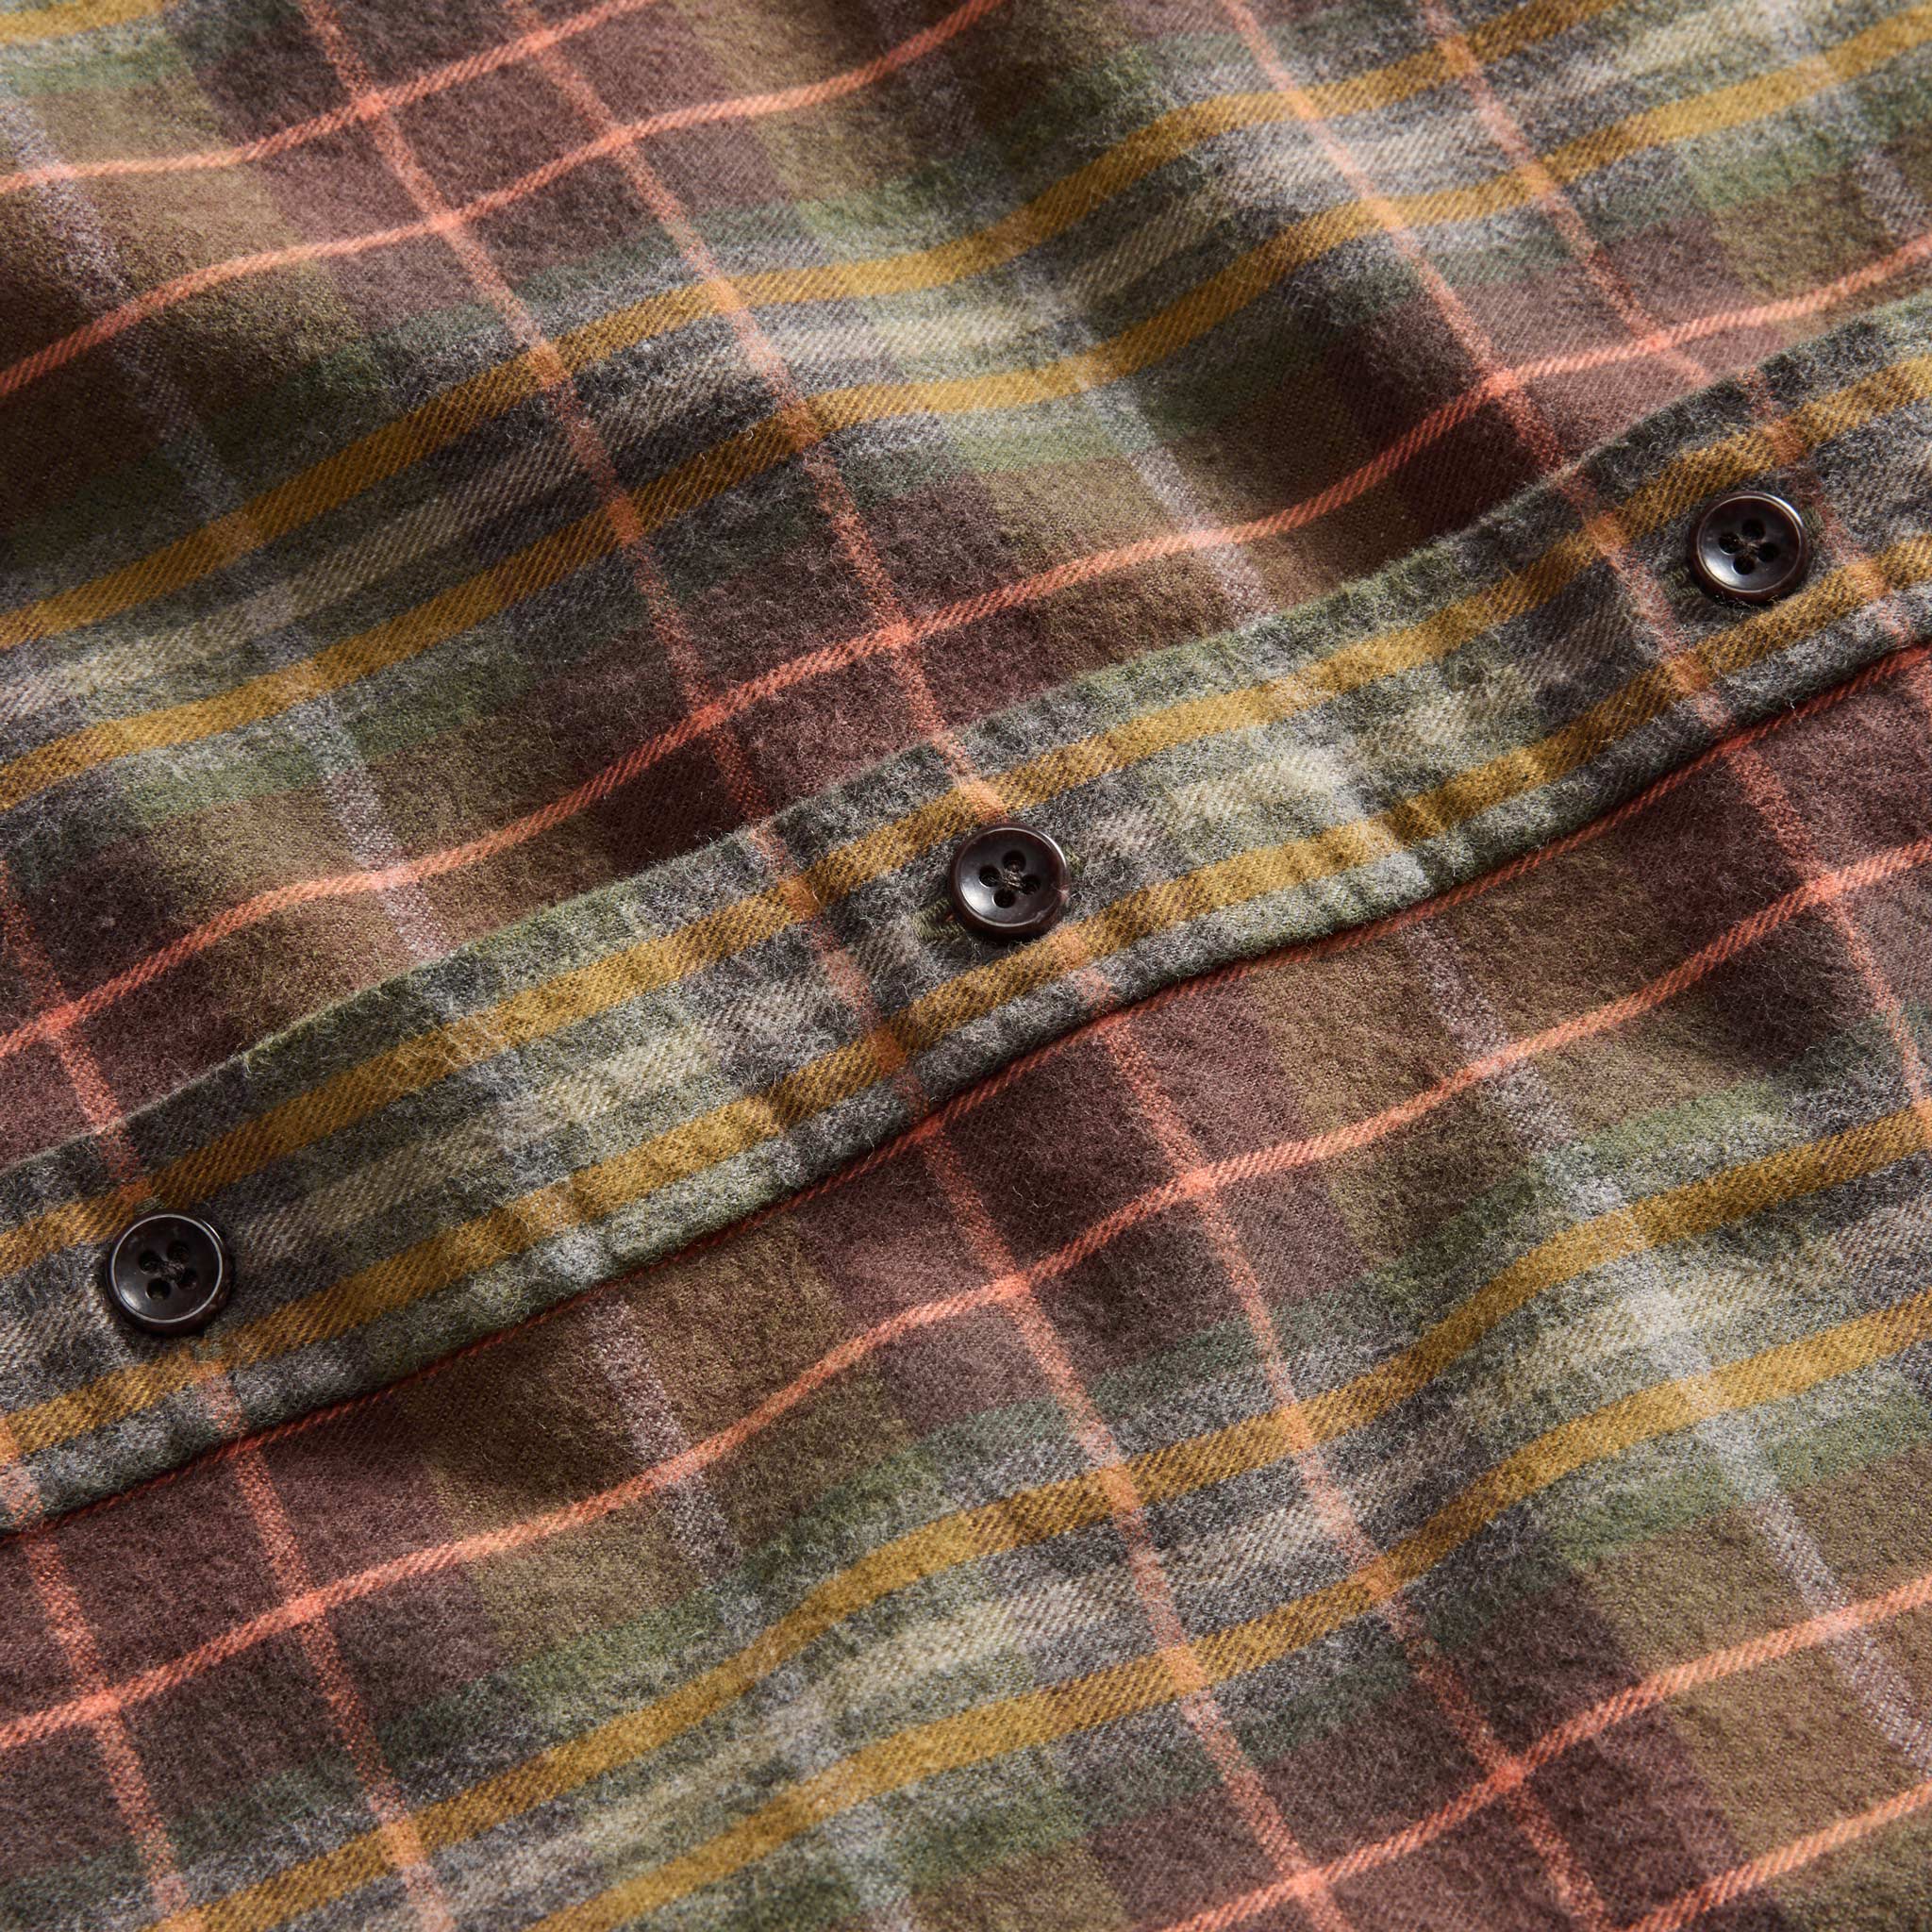 The California in Tarnished Brass Plaid